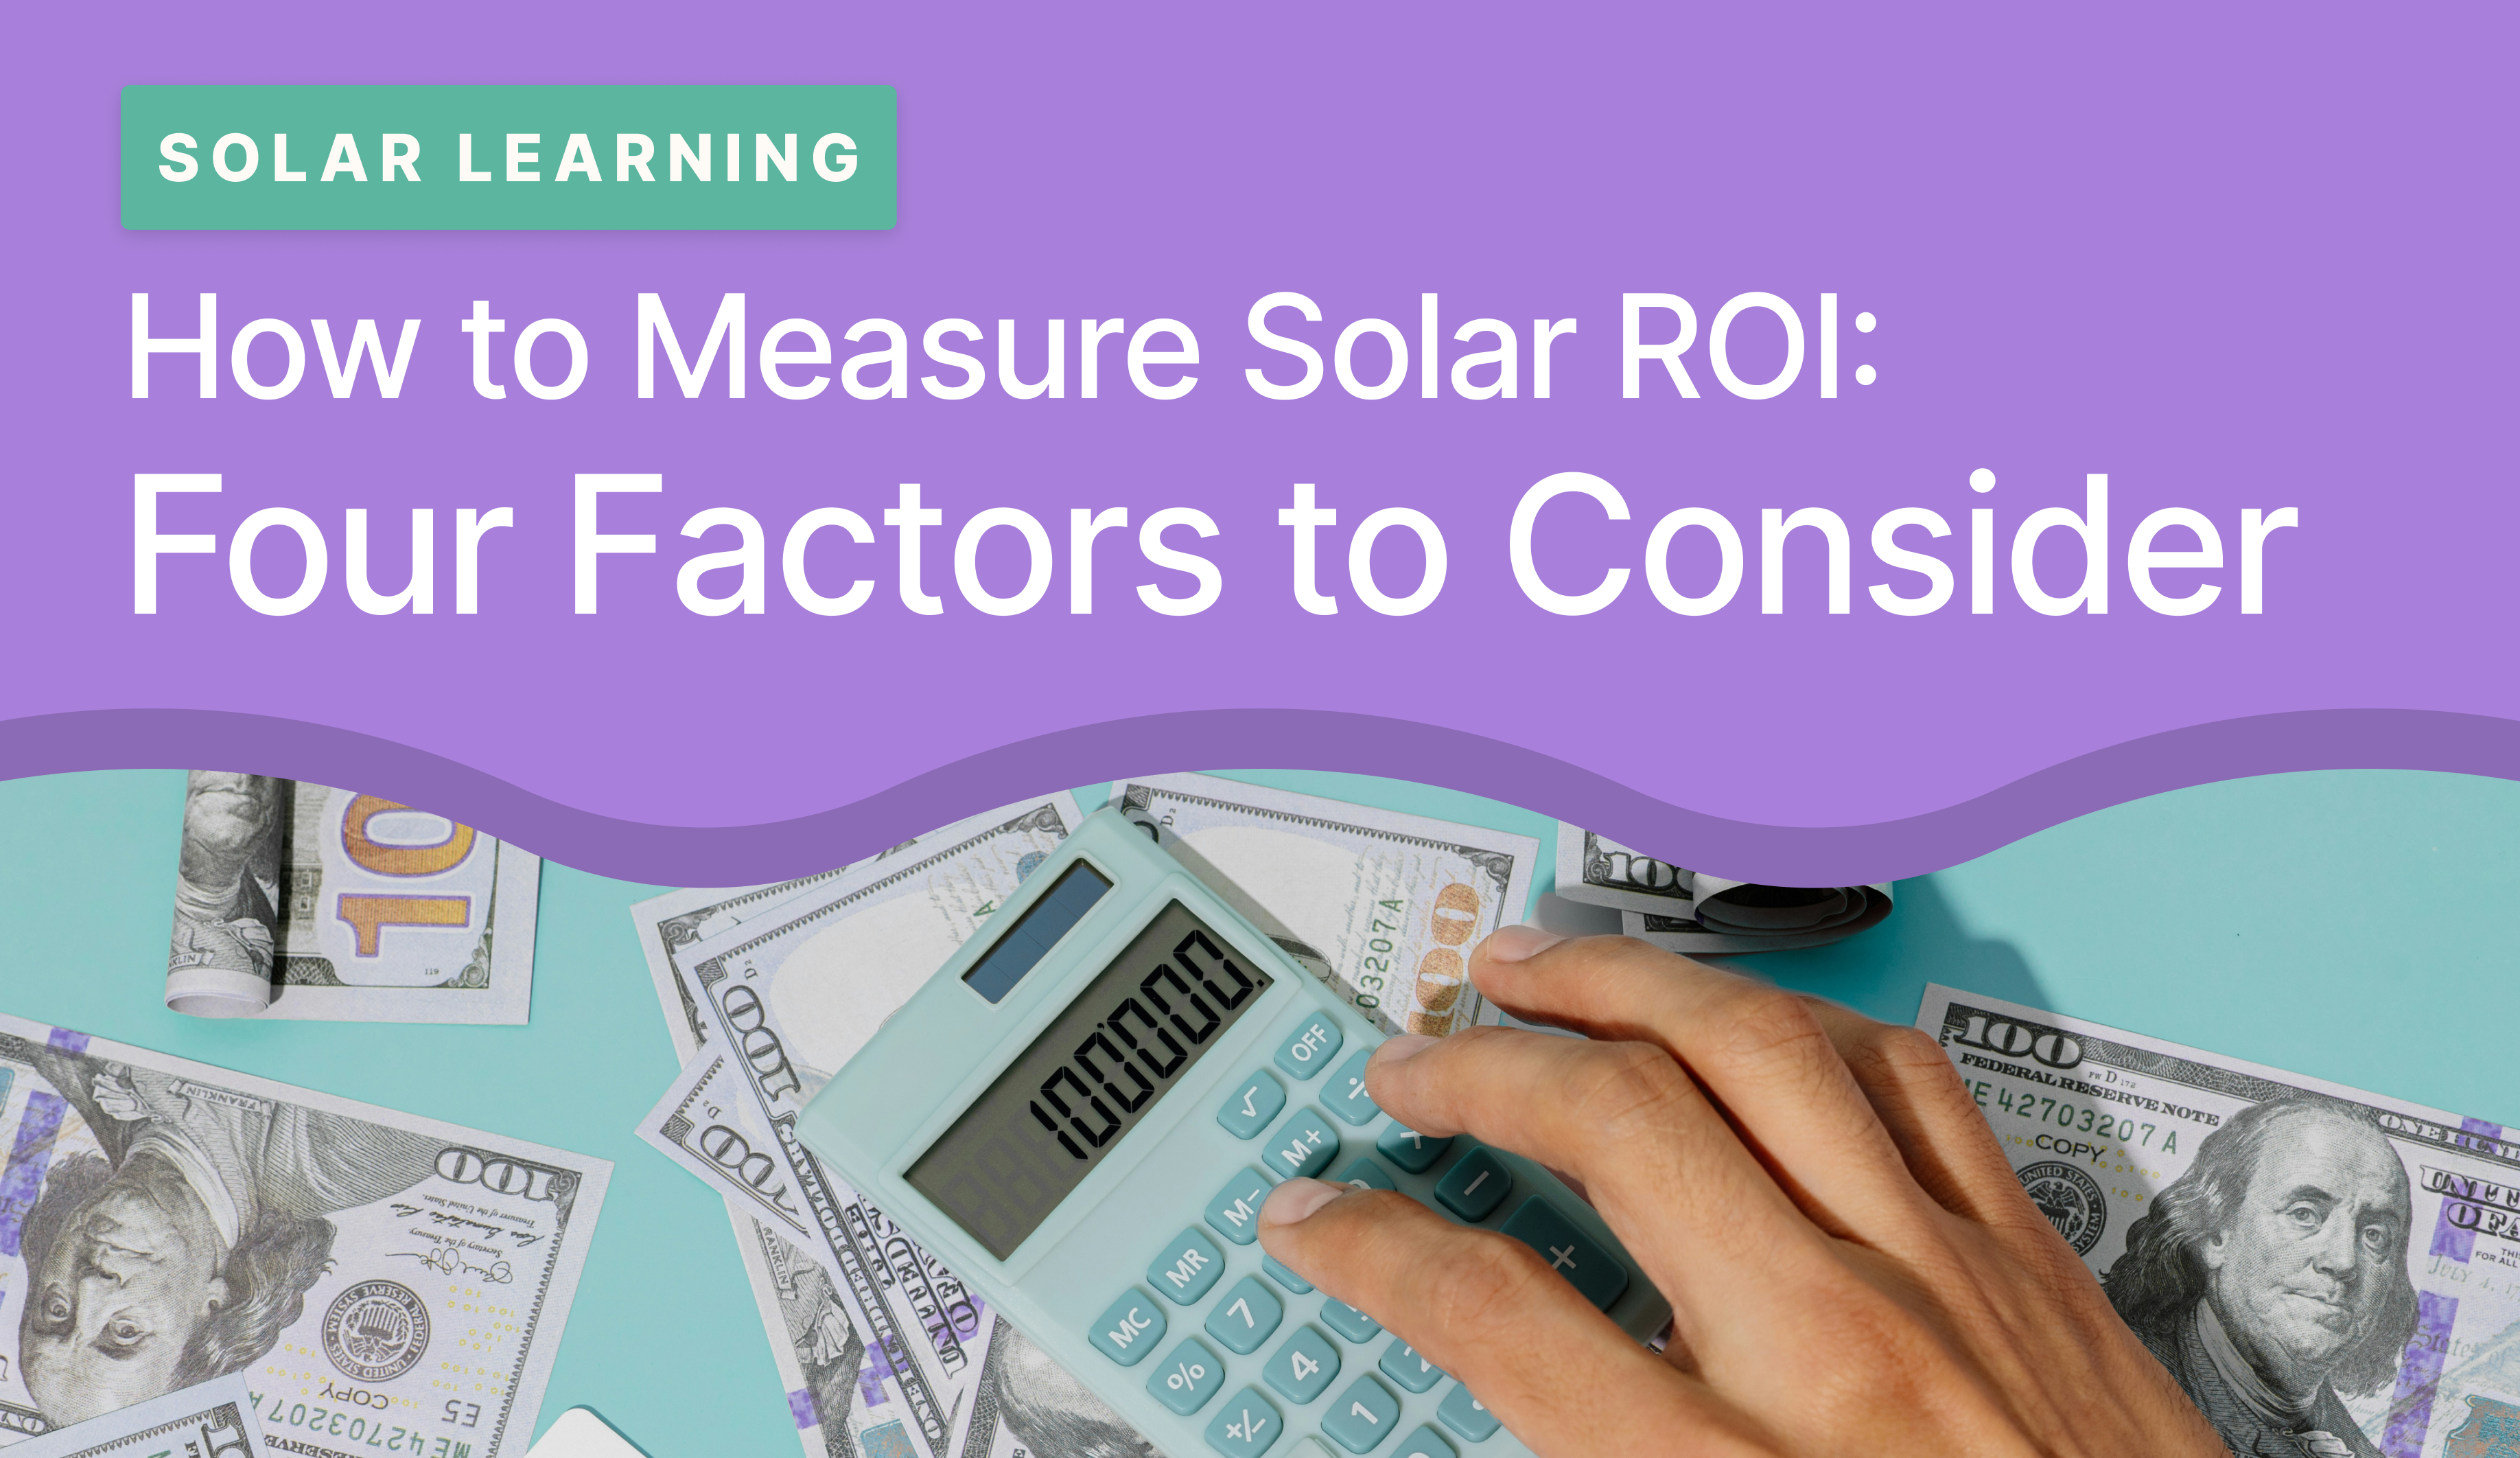 How to Measure Solar ROI: Four Factors to Consider